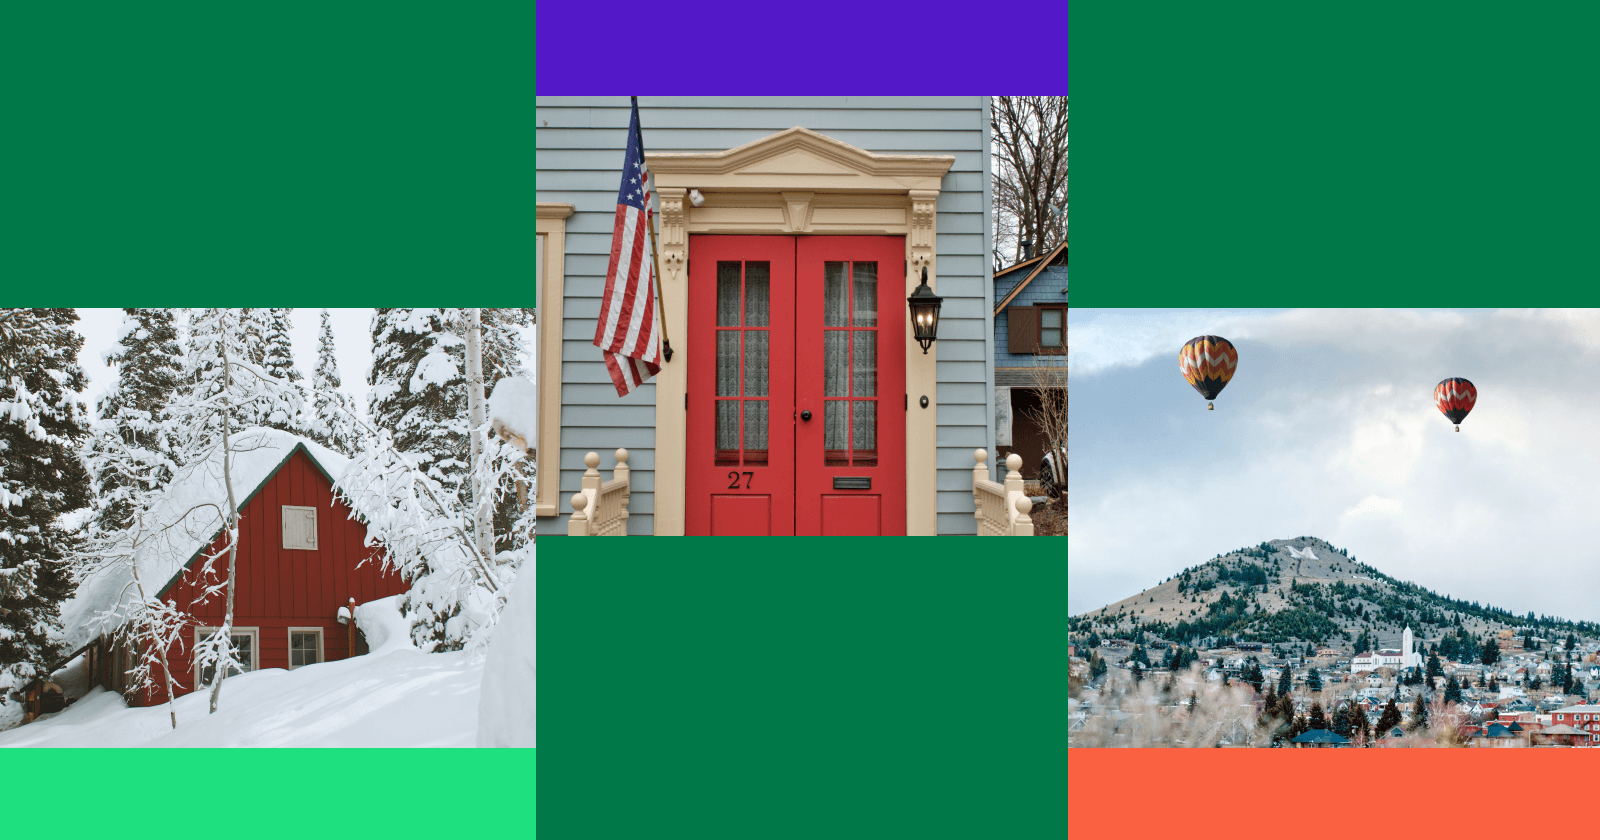 Three Images: One of Snowy Outside of House, One of Red Doors and Porch, One of Mountainscape with Hot Air Balloons